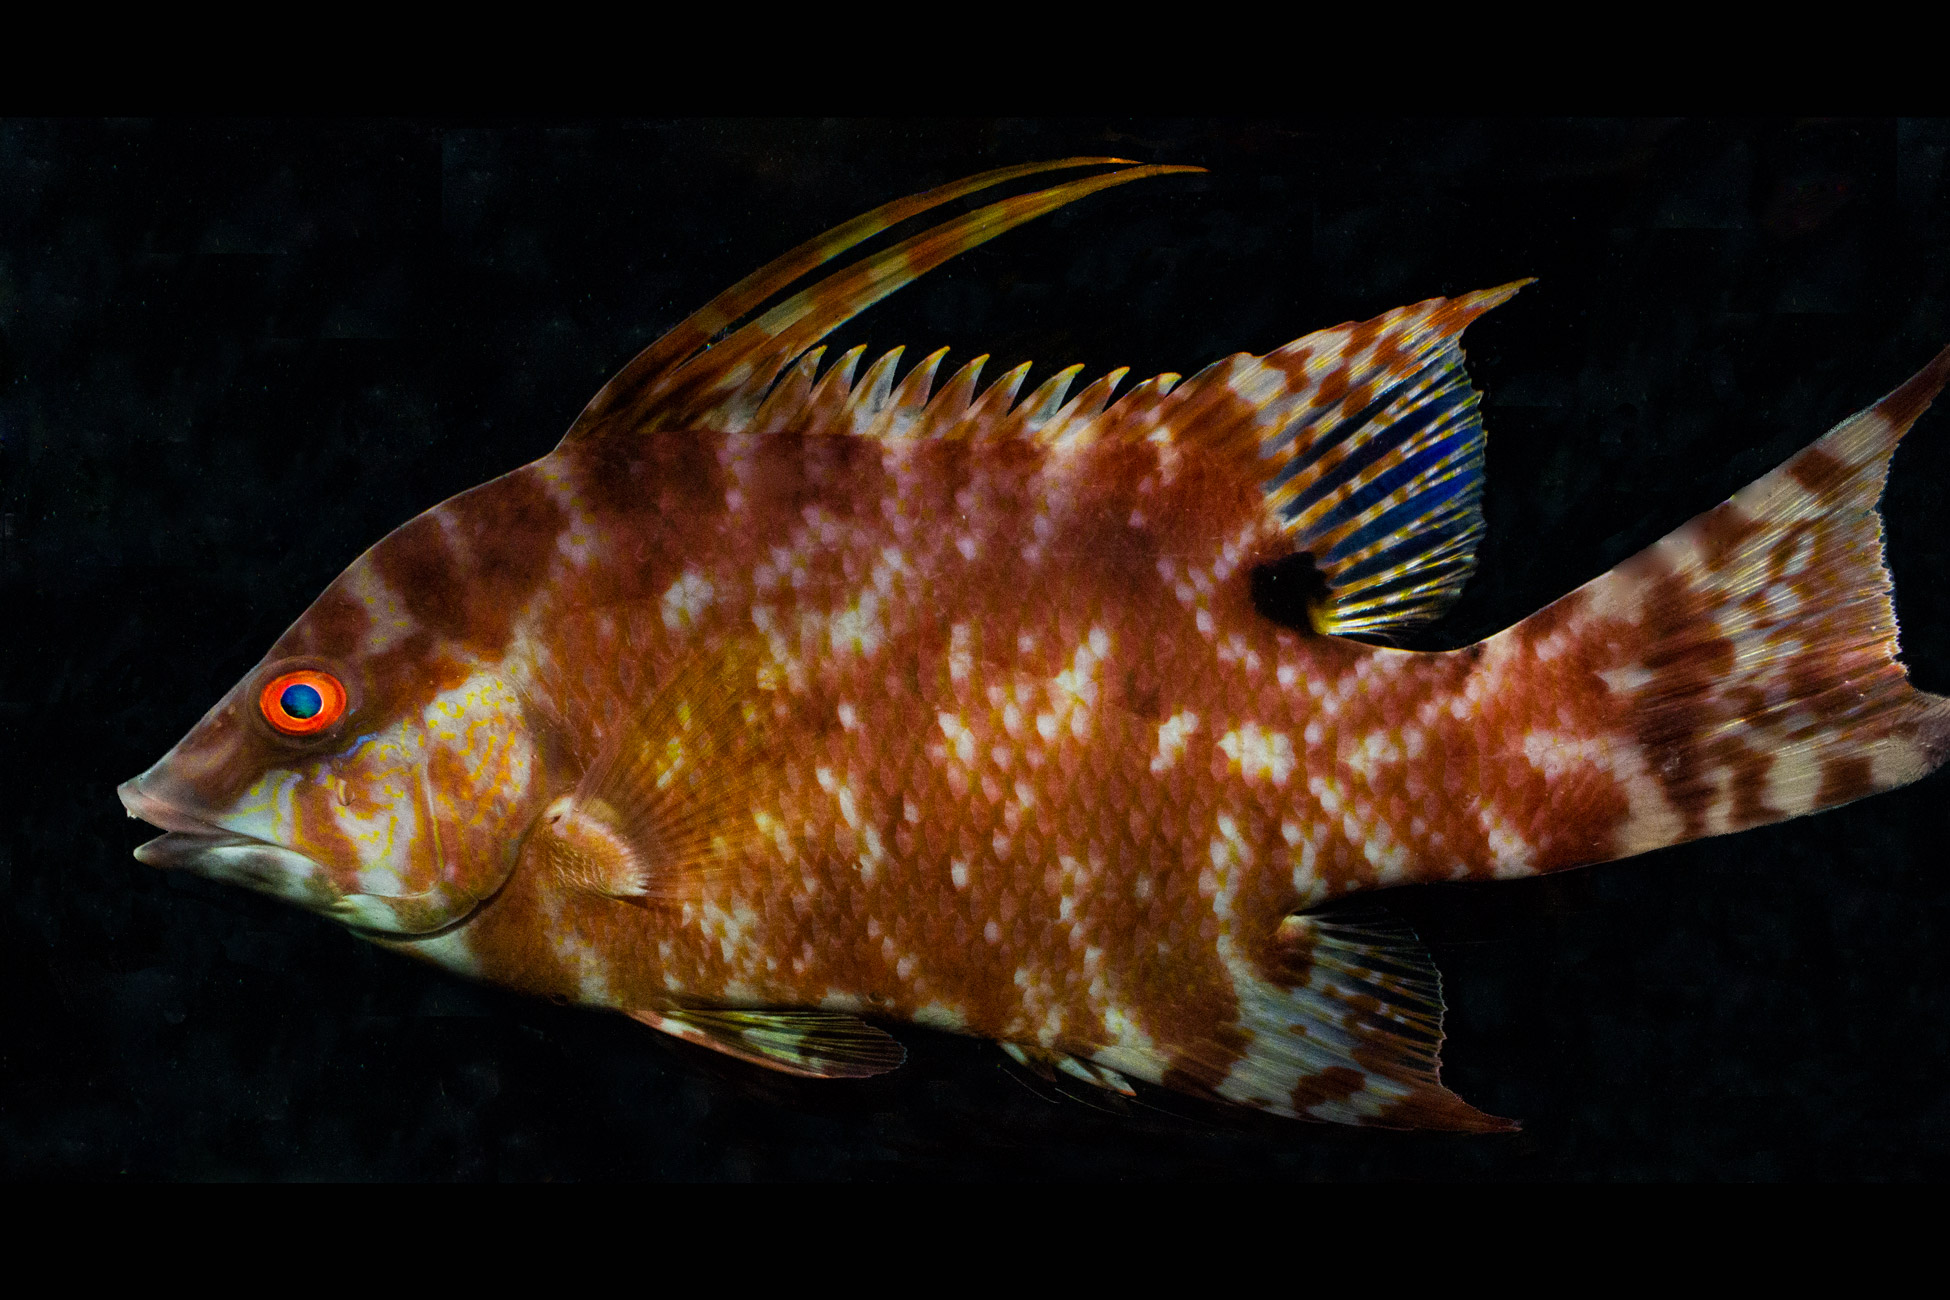 The hogfish, a common fish found along the Eastern Seaboard to the coast of Brazil.